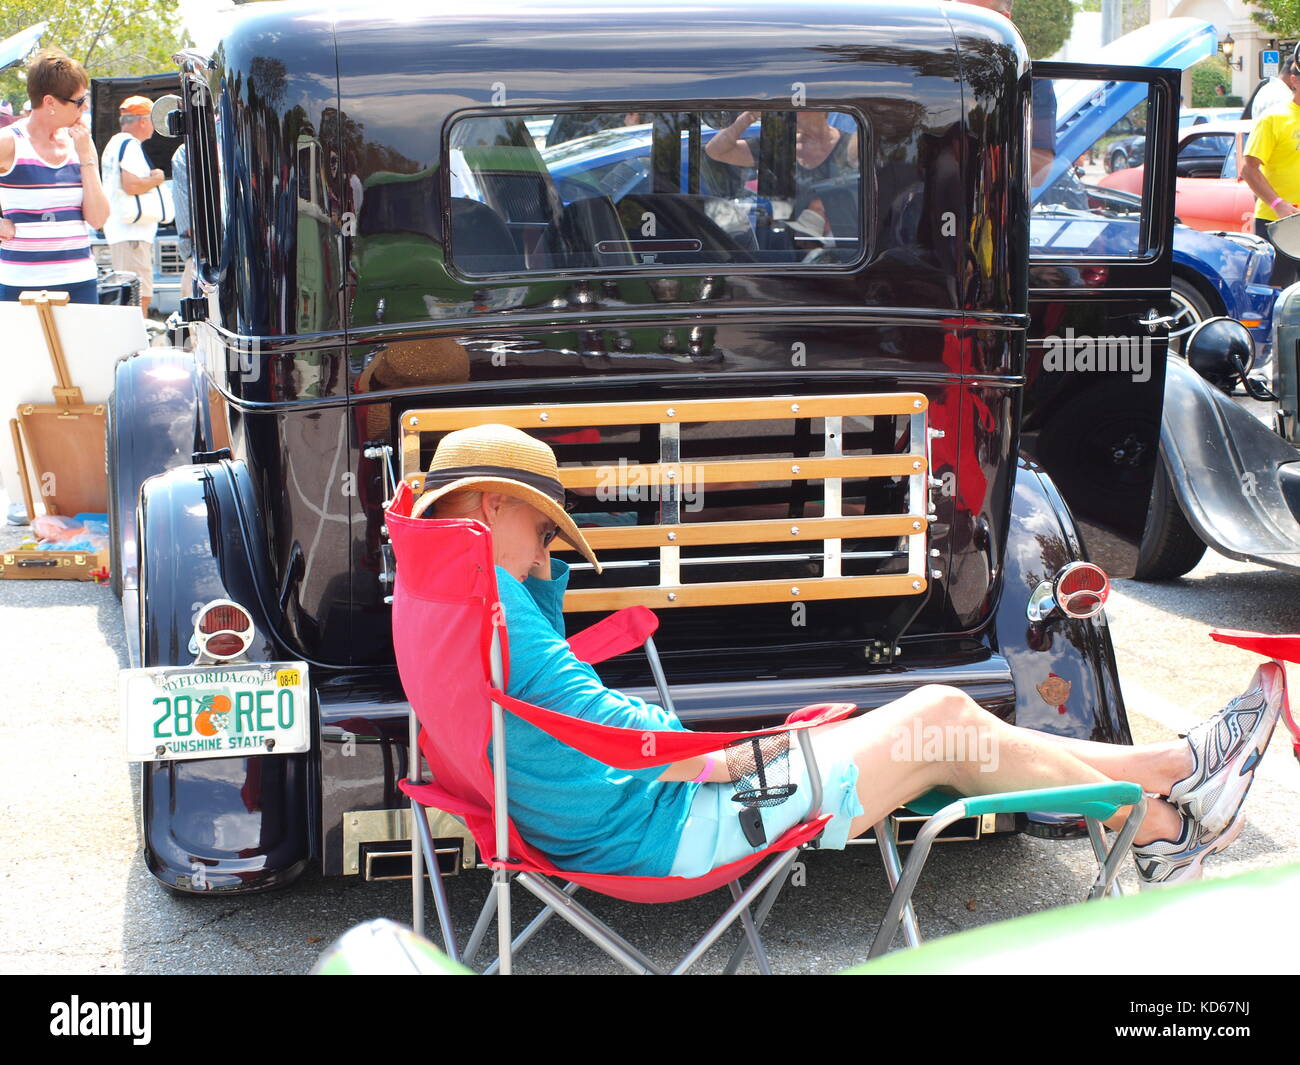 Snoozing in the sun at a east coast Florida car show. Stock Photo